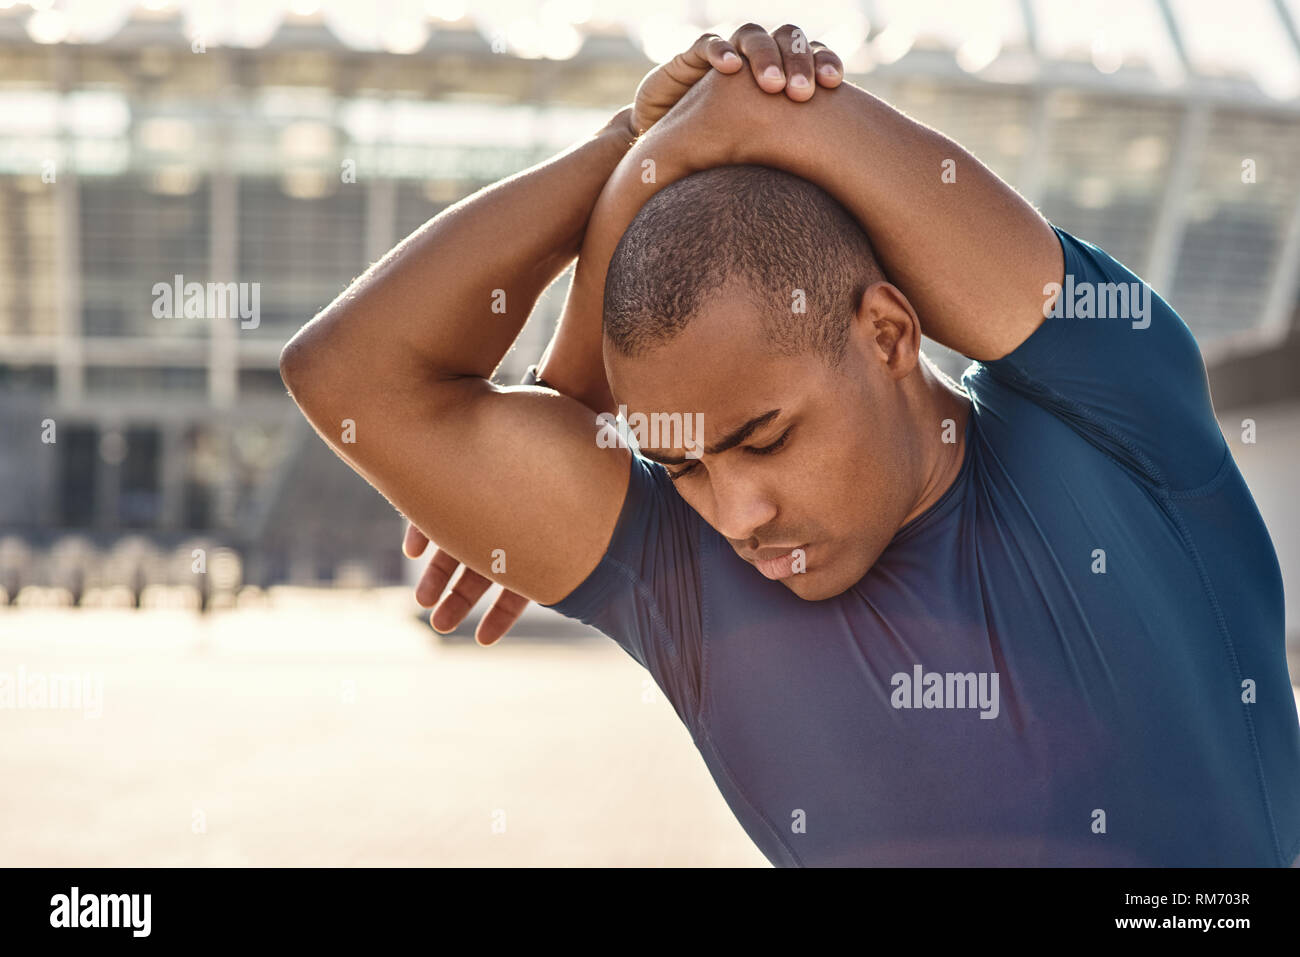 Feel your muscles. Close up portrait of athletic african man standing outside and stretching his arms before training. Cardio training. Healthy habits. Sport motivation concept. Fitness concept. Stock Photo